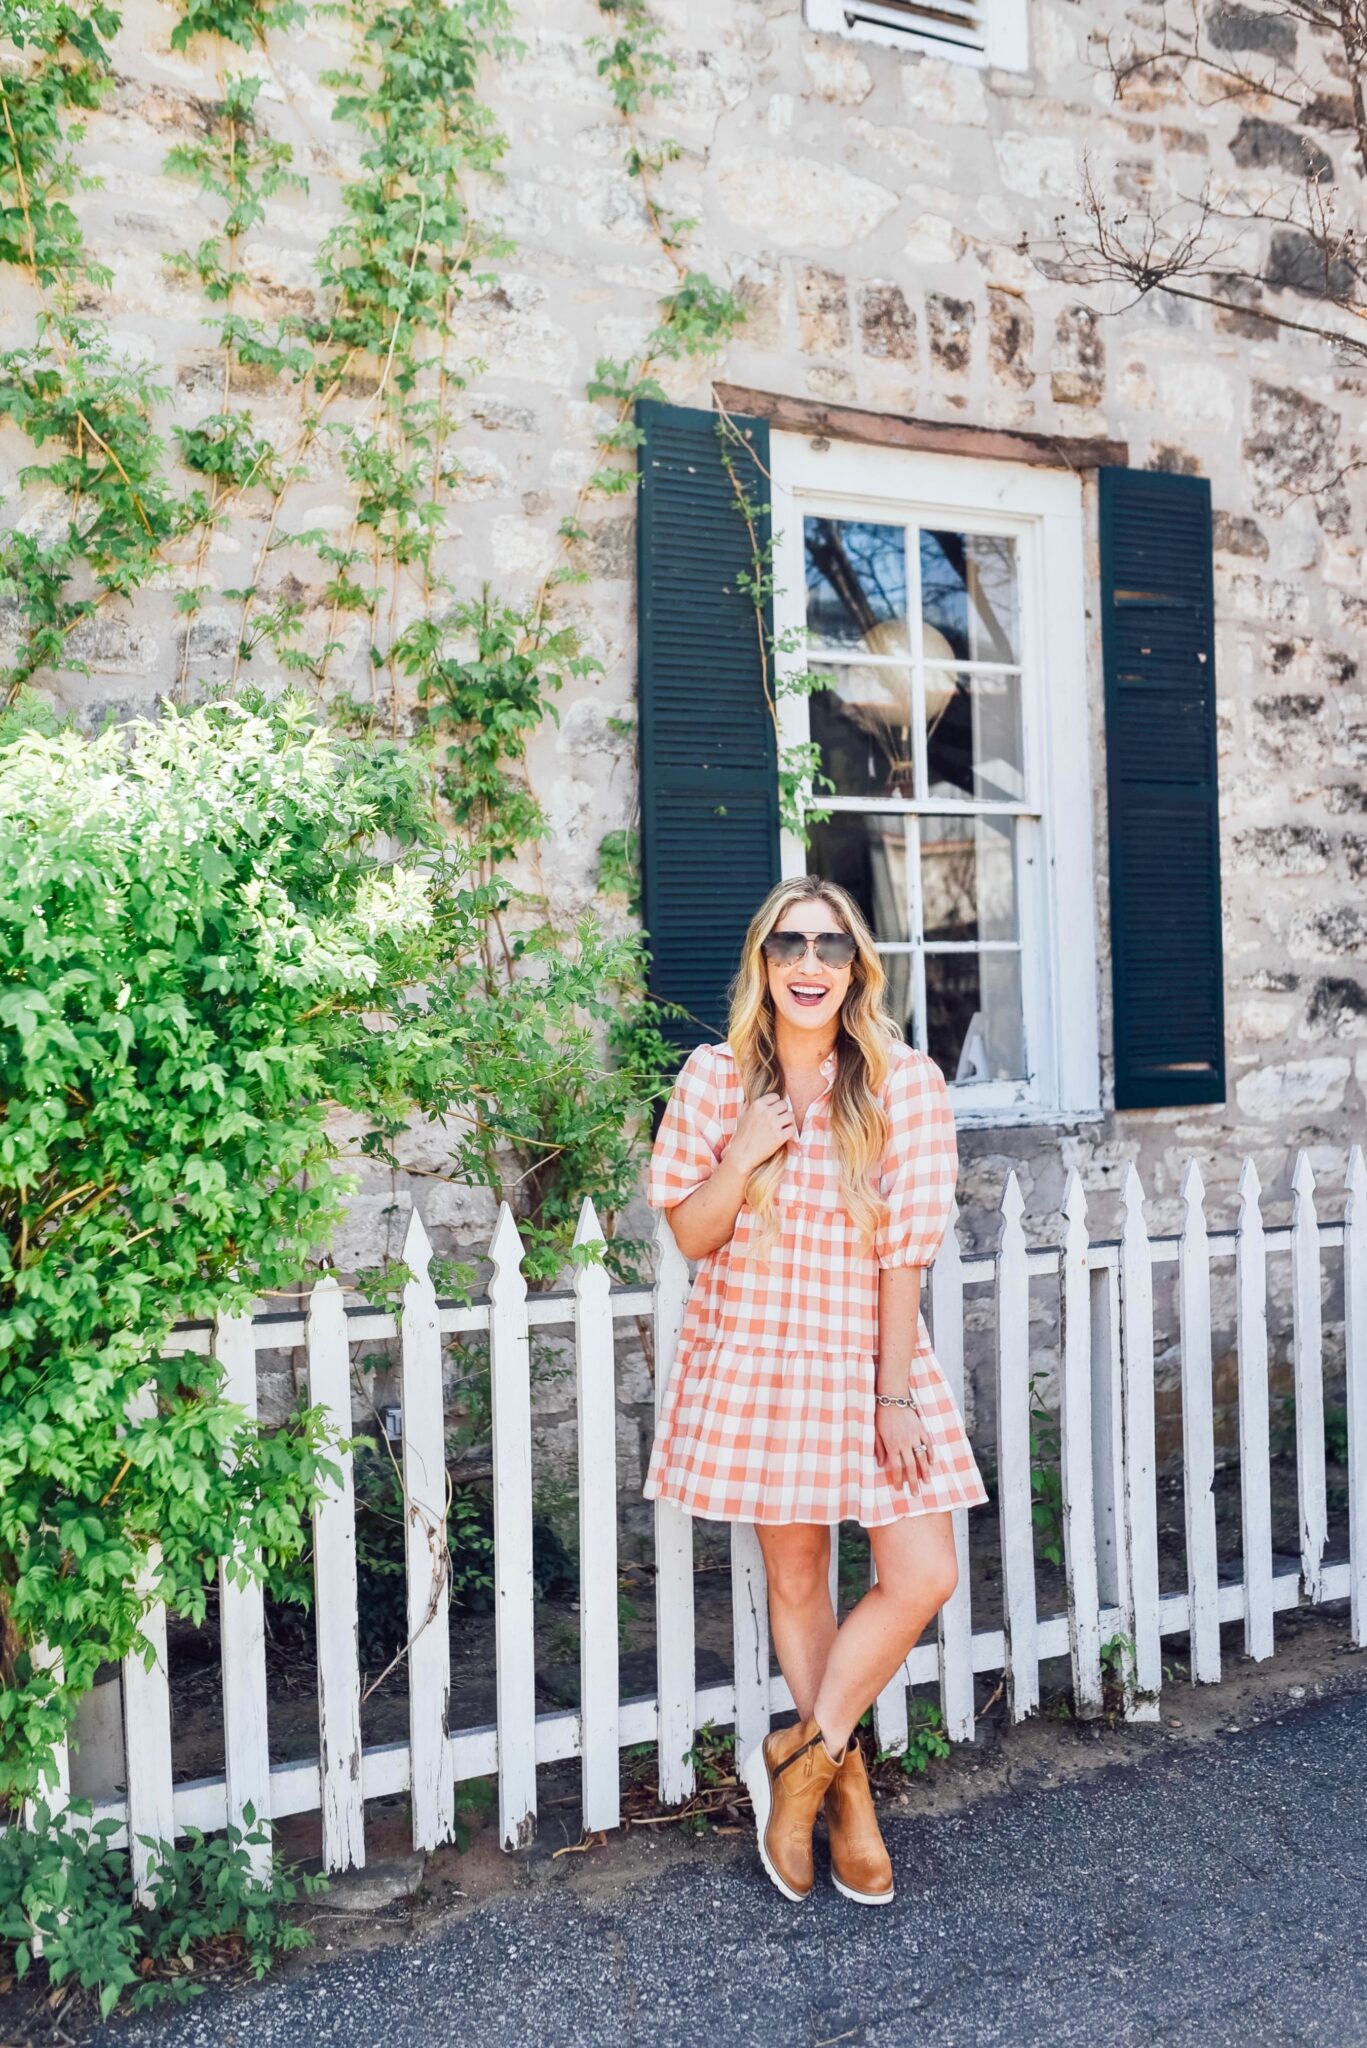 Fredericksburg, TX Travel Guide: the Best Things to Do on a Girls' Trip featured by Walking in Memphis in High Heels.